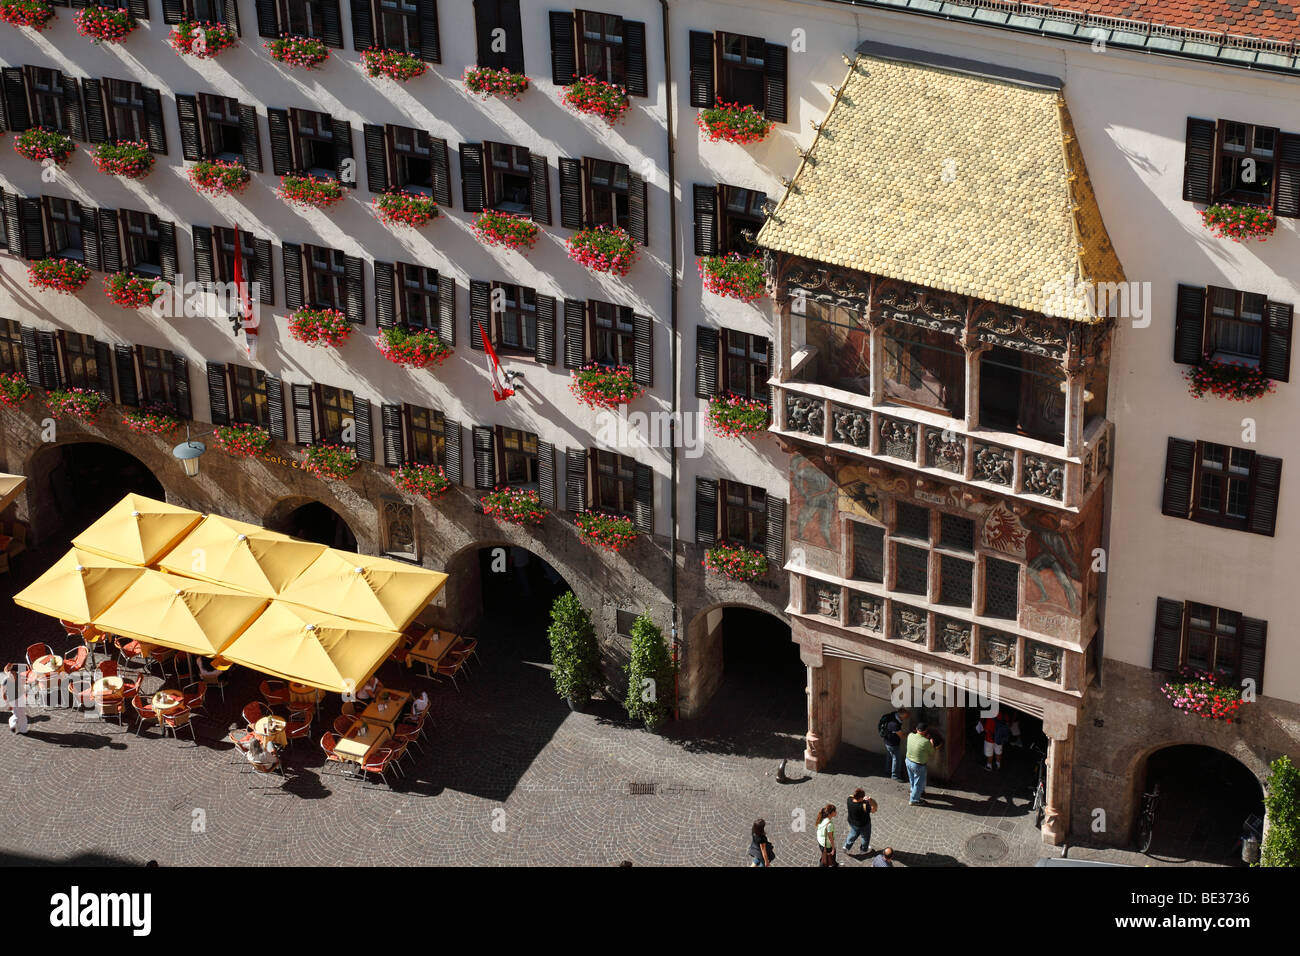 Golden Roof, view from City Tower, historic town centre of Innsbruck, Tyrol, Austria, Europe Stock Photo